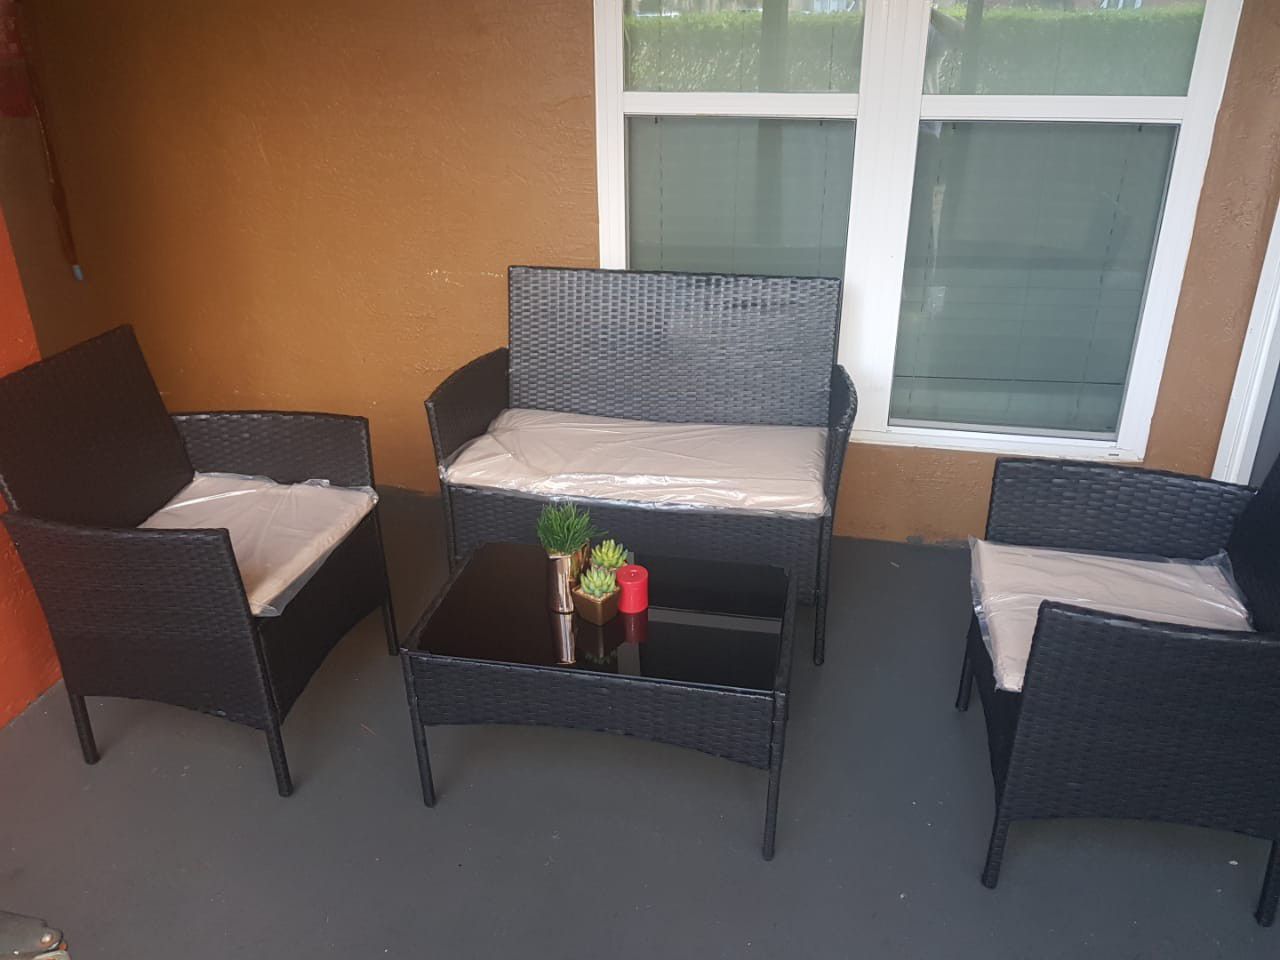 Brand new outdoor patio furniture set with table and cushions